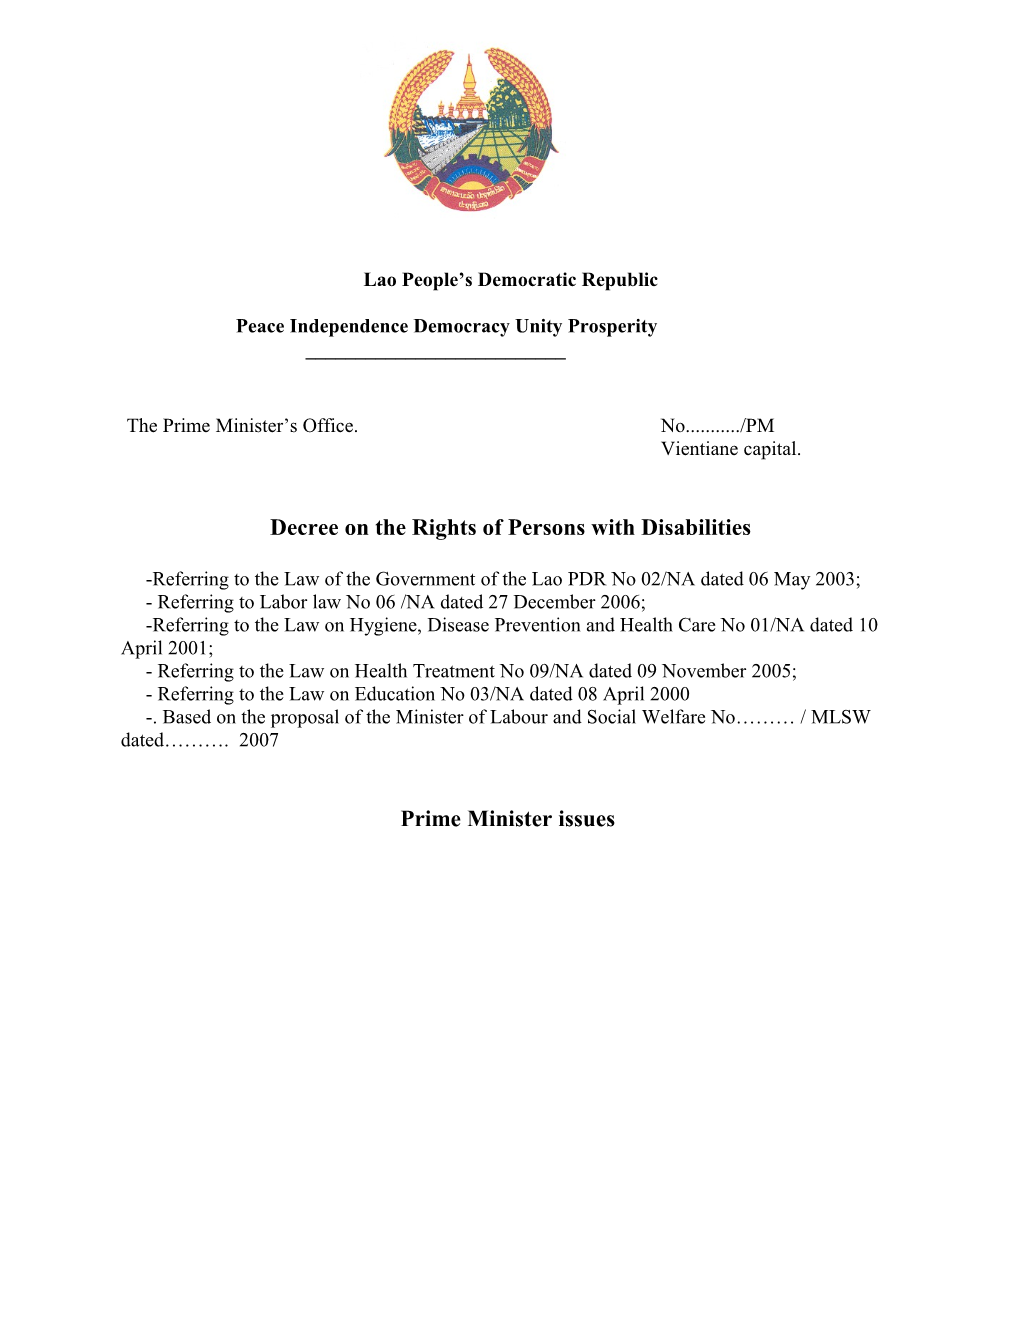 Draft Decree on the Rights of Persons with Disabilities for Lao PDR